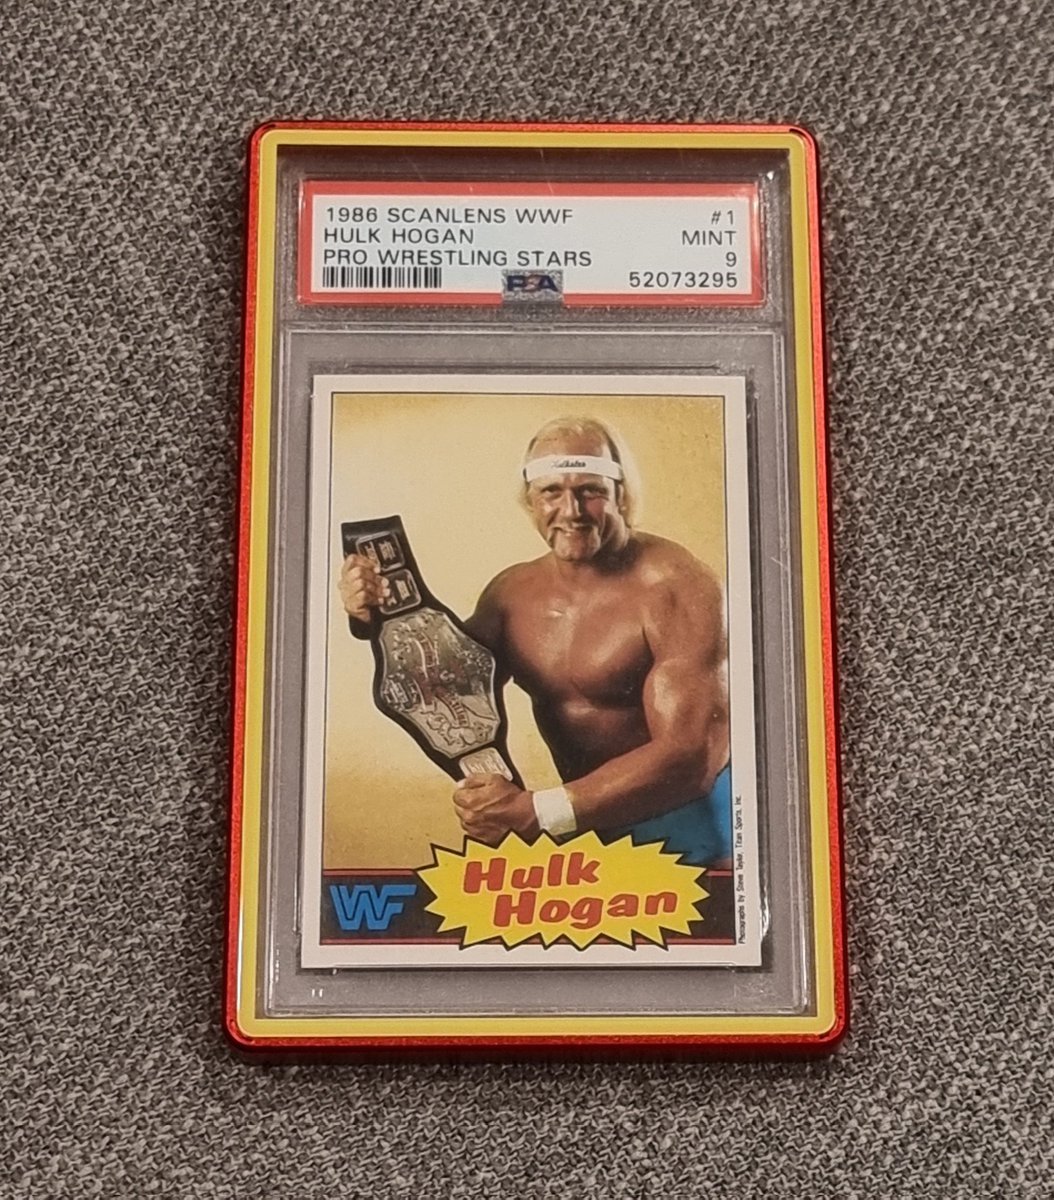 There's been a lot of talk about early Hulk Hogan cards lately. I think the most underrated one is the 1986 Scanlens WWF card. I recently added a red and yellow slabmags case to this one!
#wrestlingcardwednesday